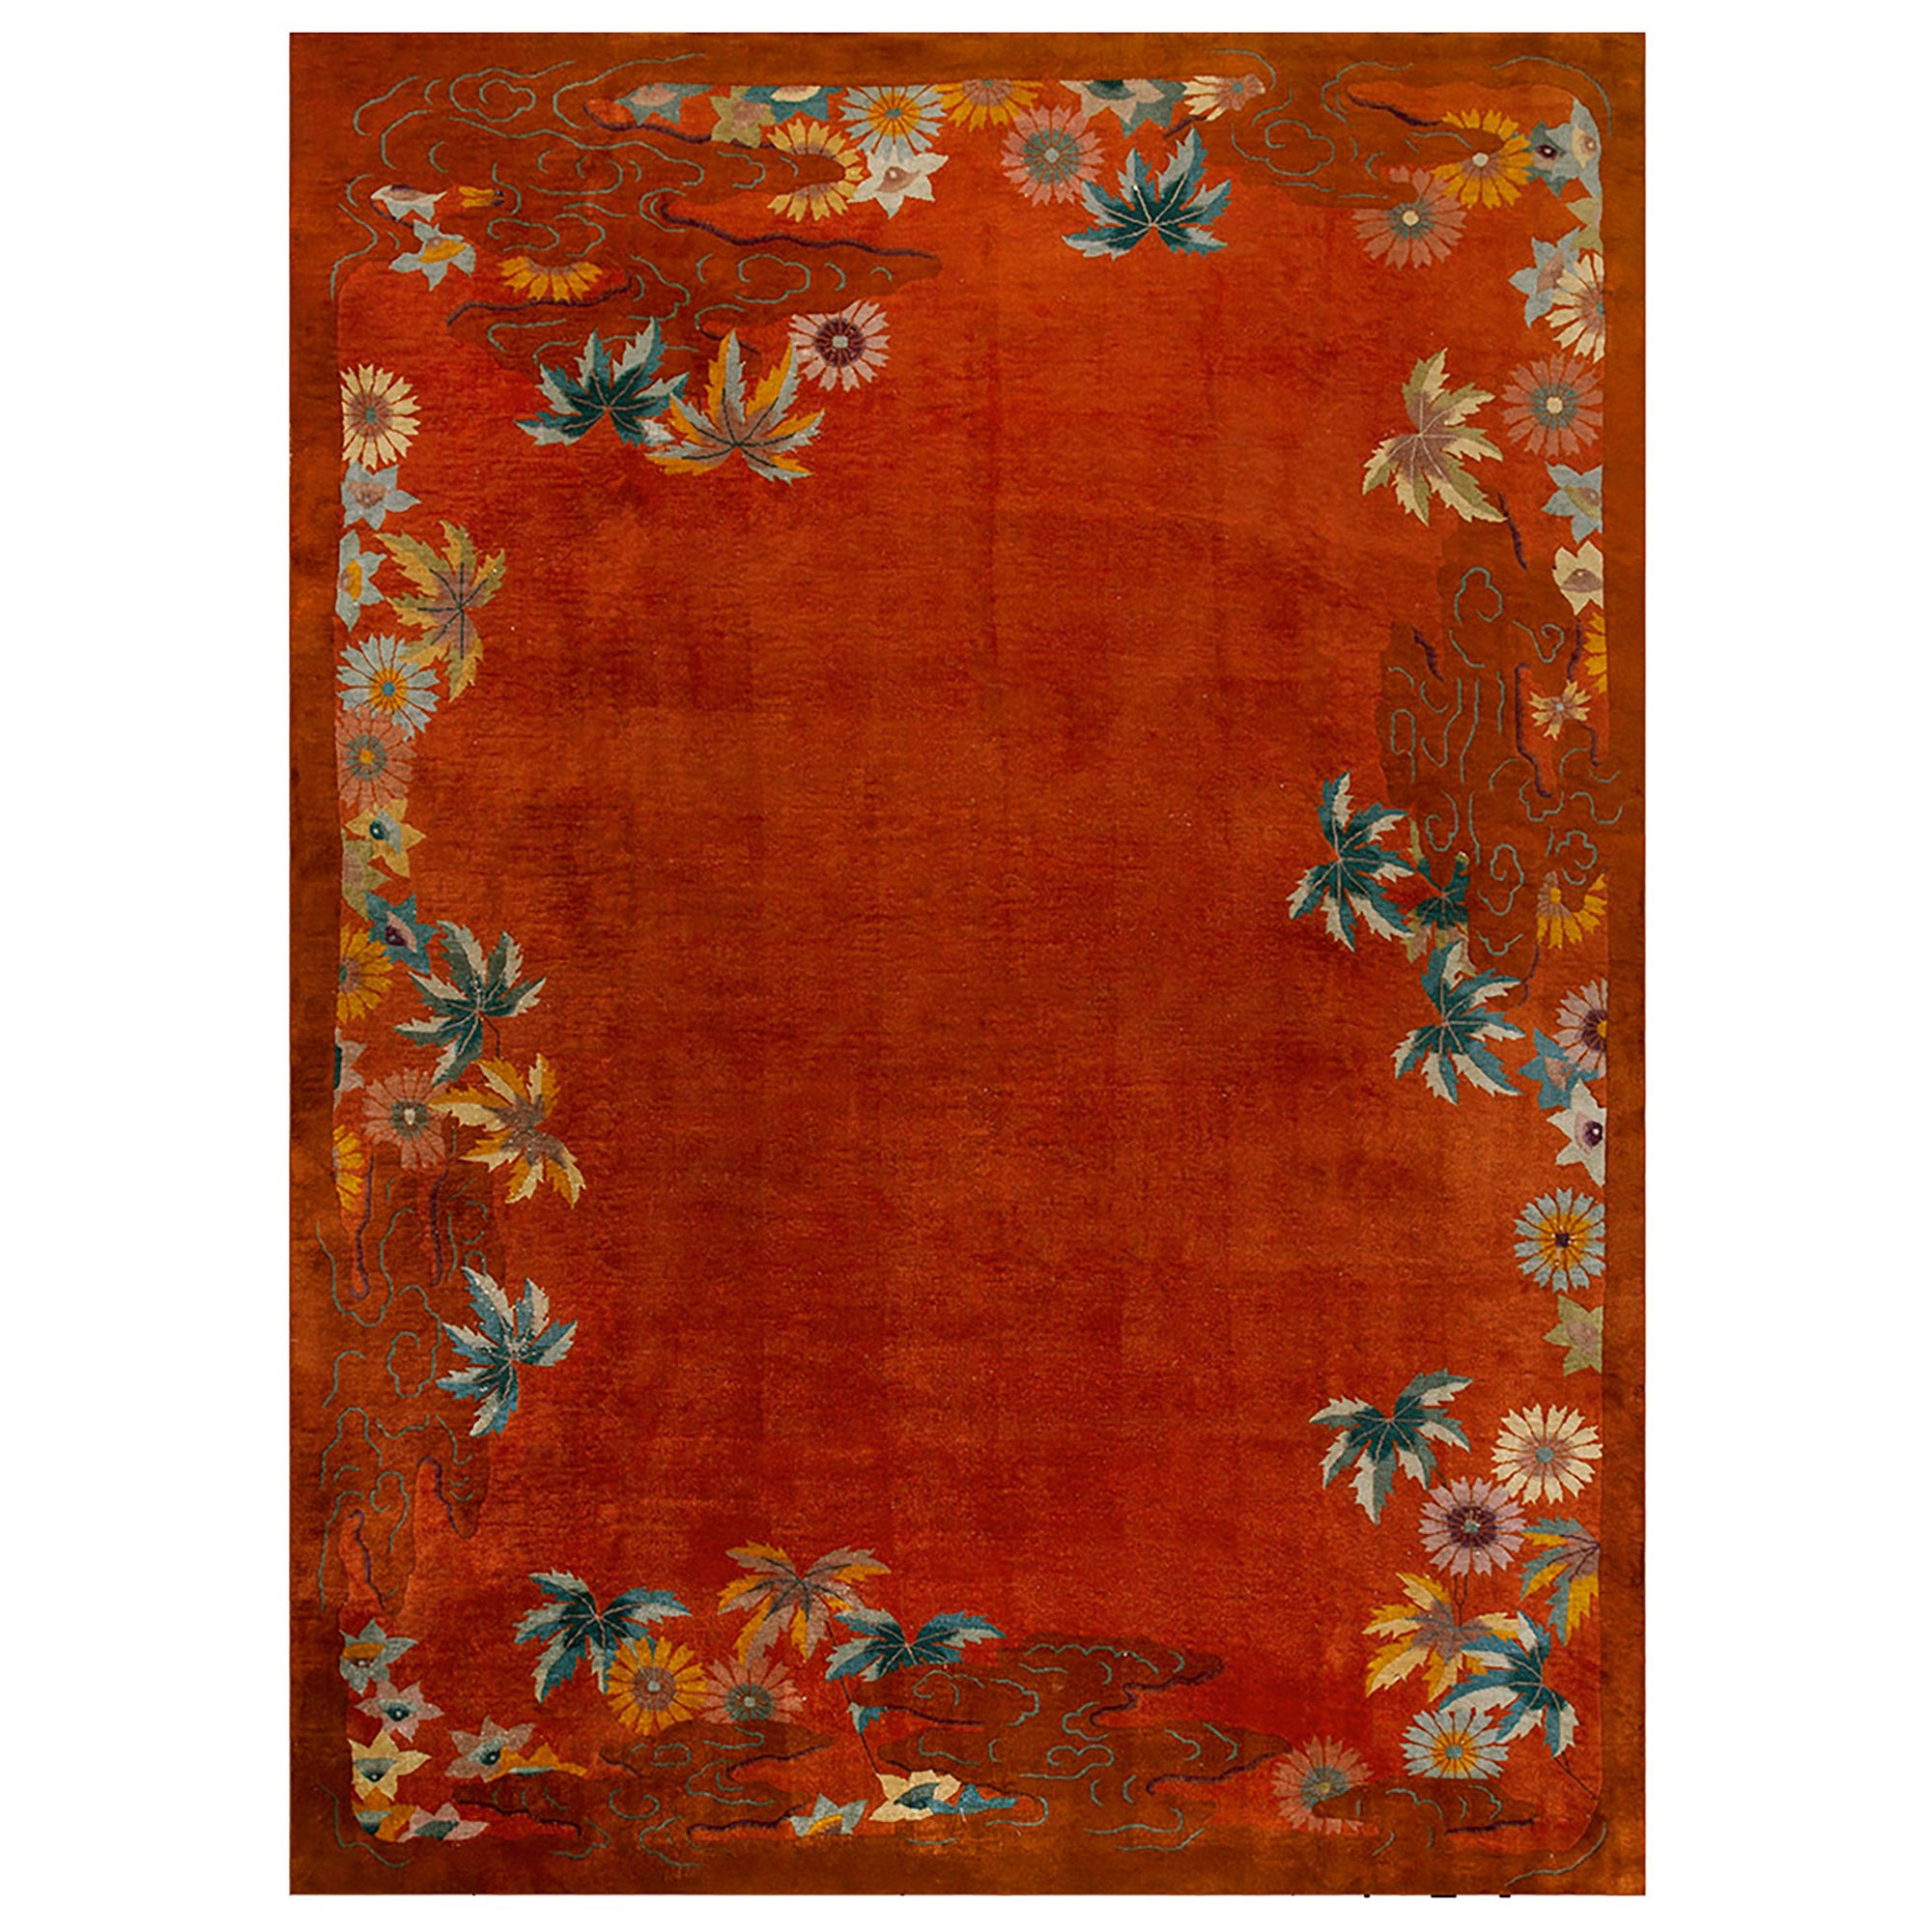 1920s Chinese Art Deco Carpet ( 9'9" x 13'3" - 297 x 404 ) For Sale